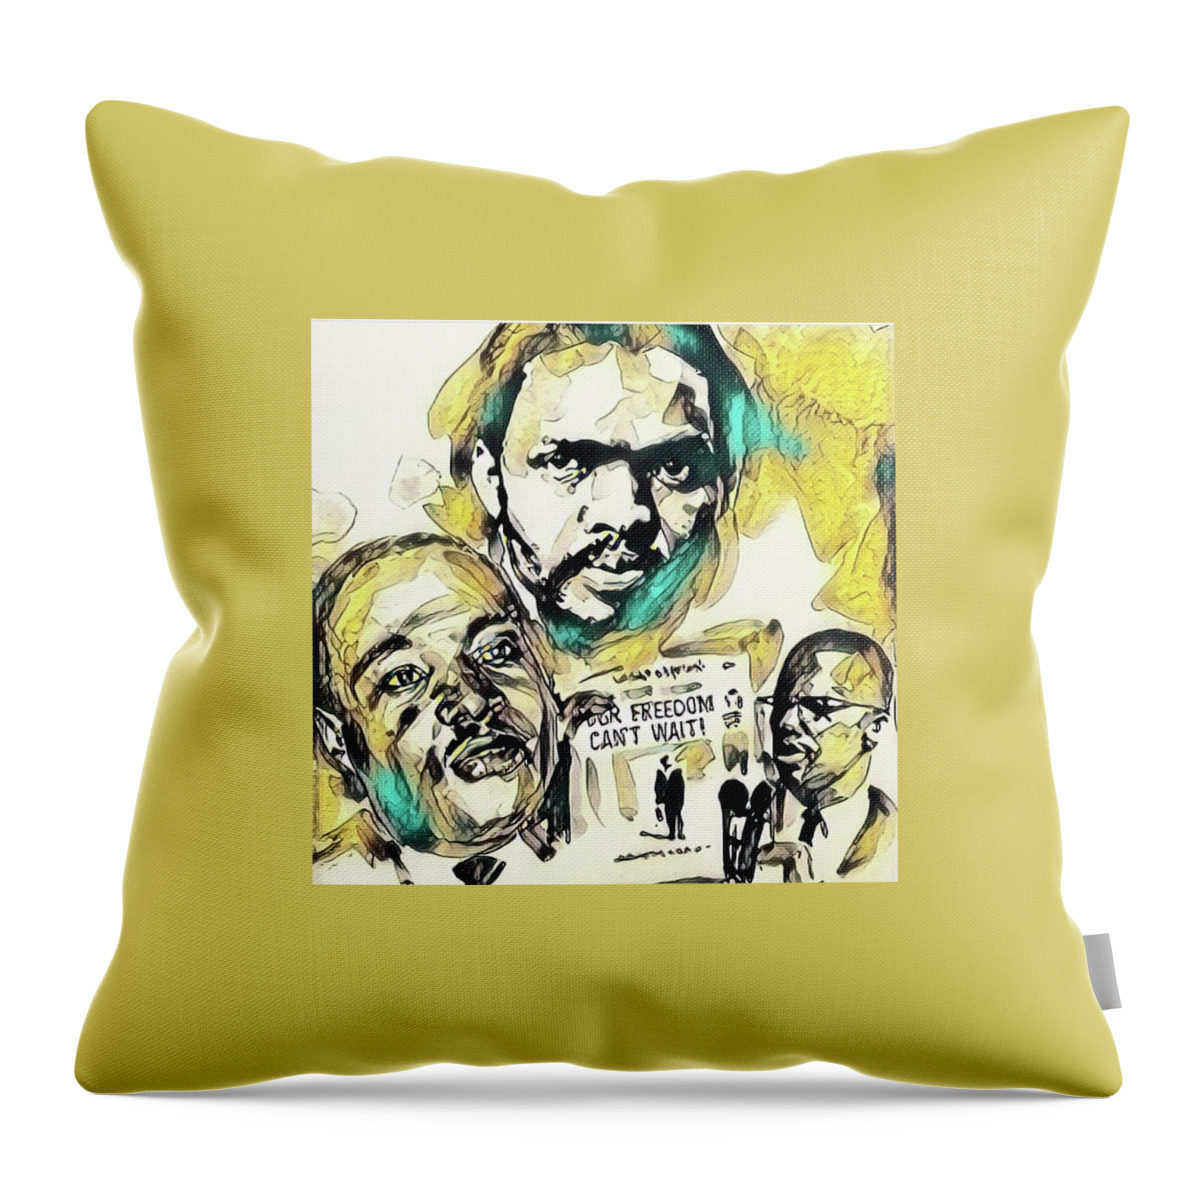  Throw Pillow featuring the painting Wisdom is Principle by Try Cheatham